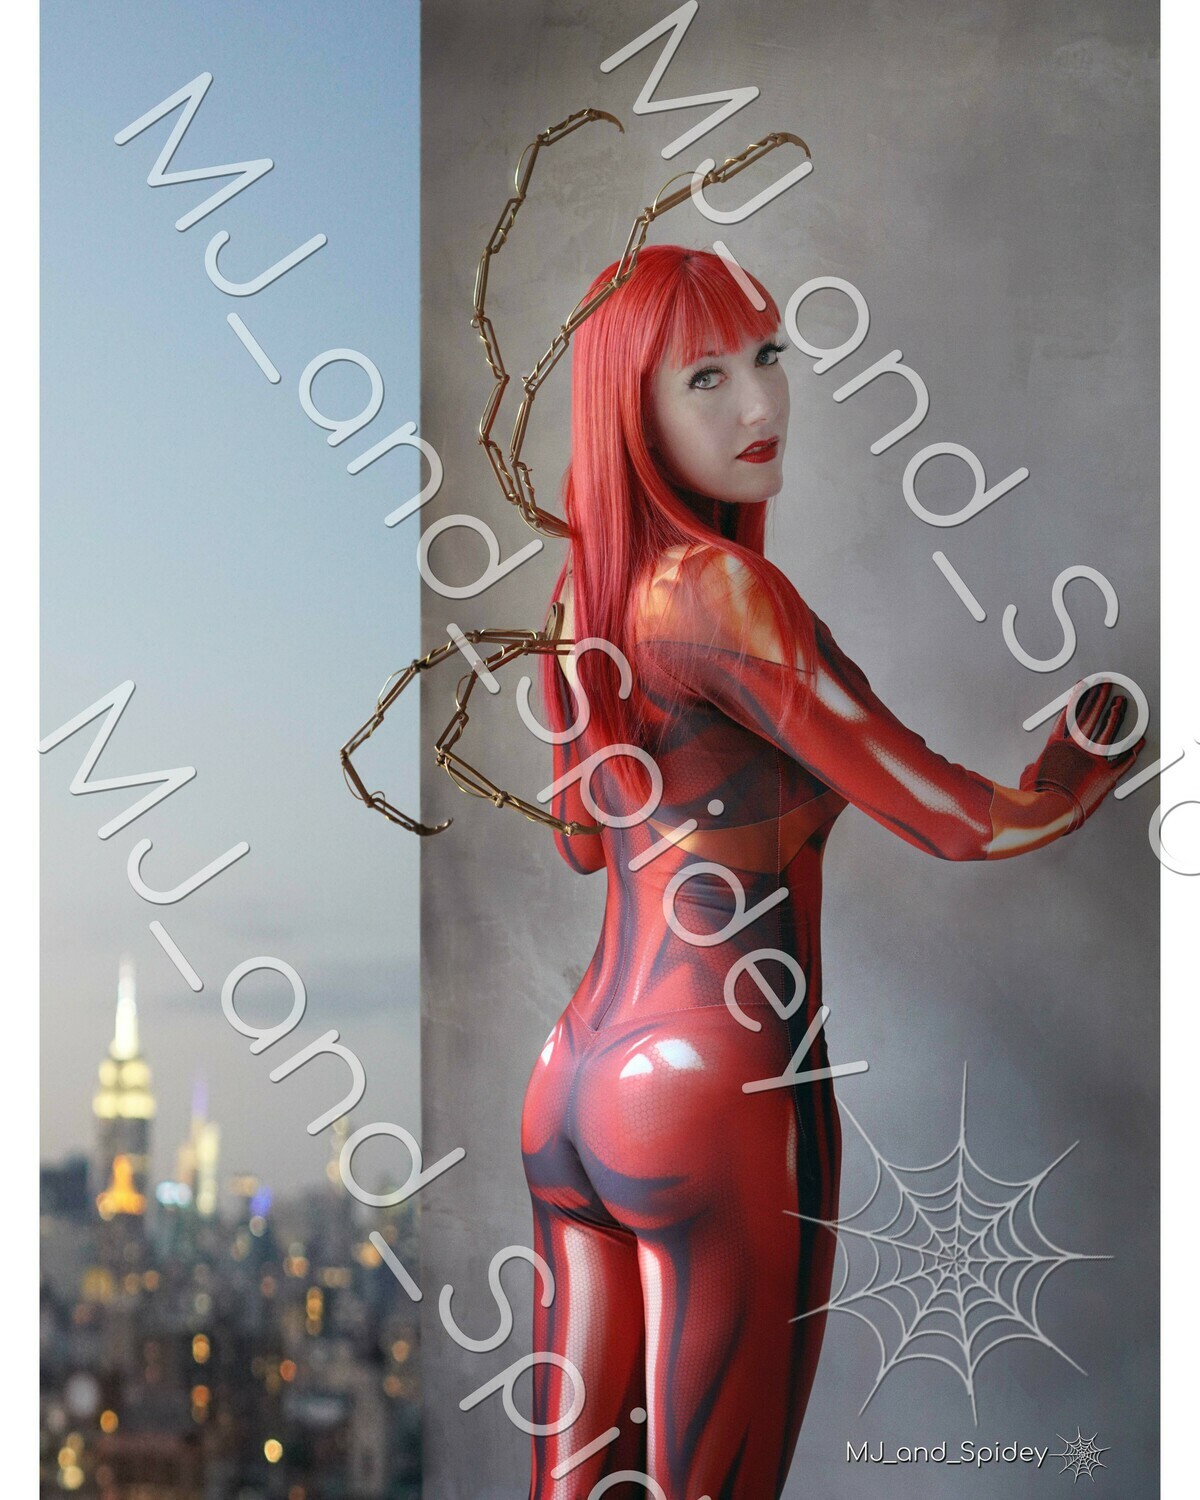 Marvel - Spider-Man - Mary Jane Watson - Iron Spider 4 -  Cosplay Print (@MJ_and_Spidey, MJ and Spidey, Comics)